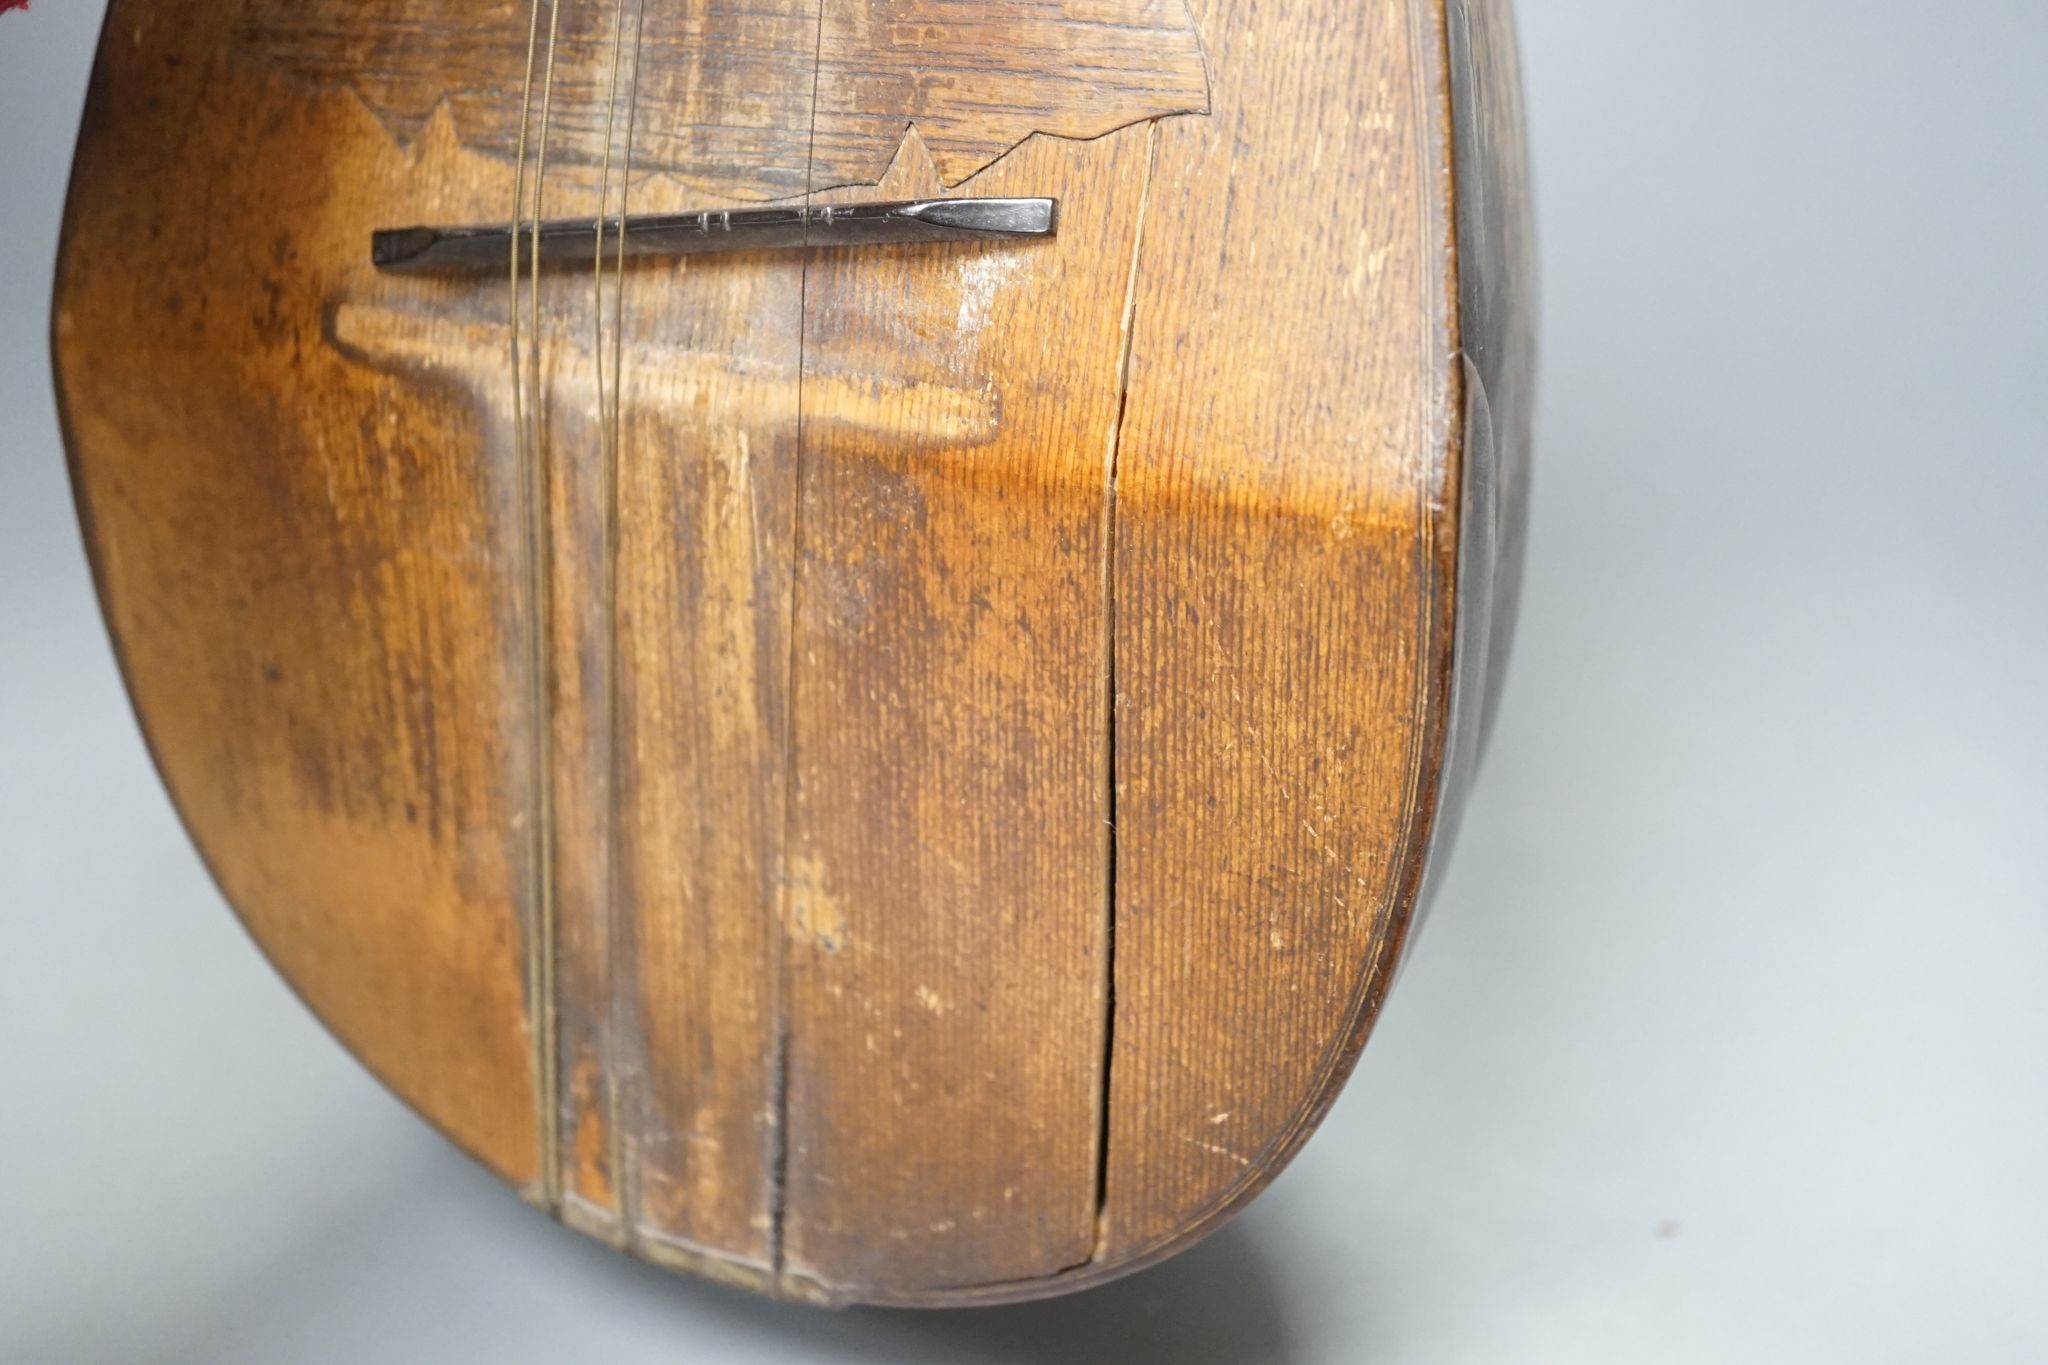 A rosewood and boxwood mandolin with bone pegs, circa 1900